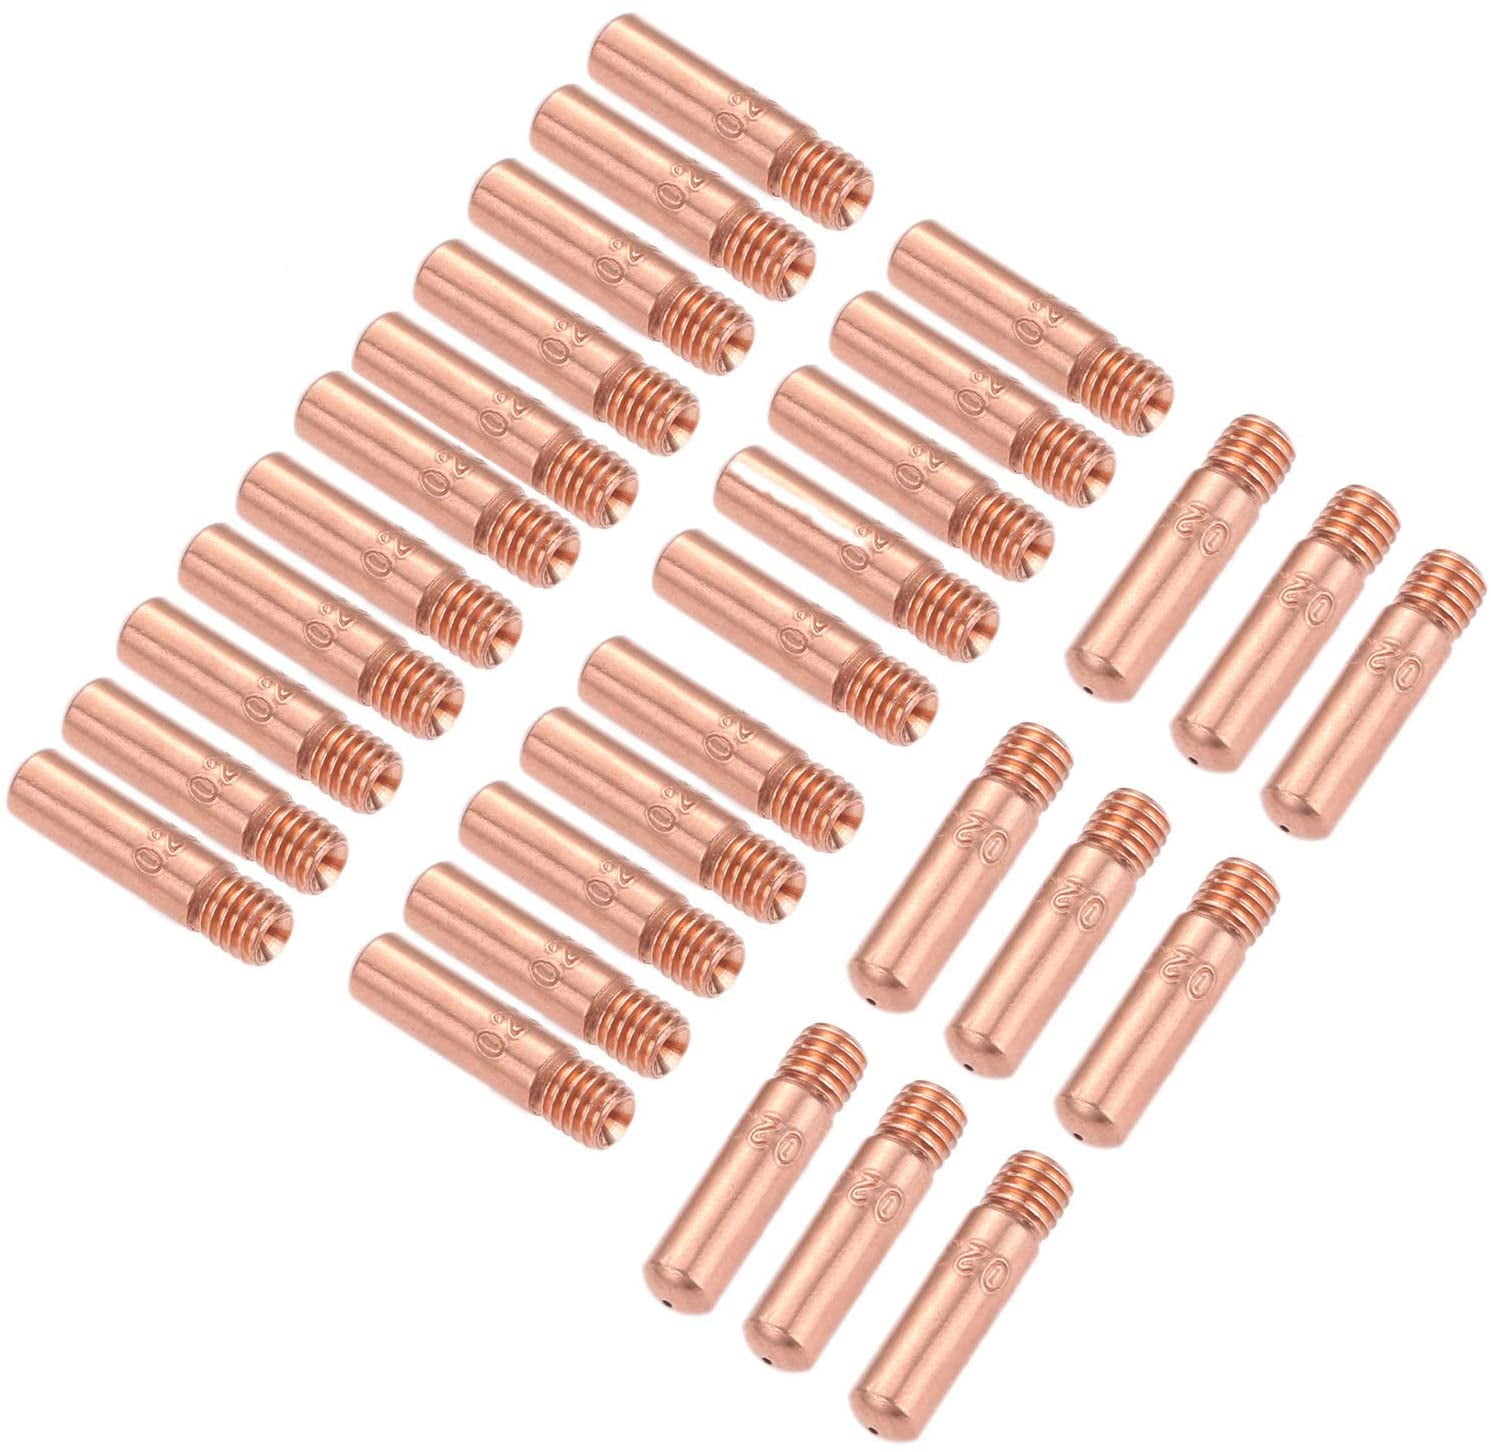 0.023" Contact Tip kit for Lincoln Electric OEM Replacement Gun 11205 